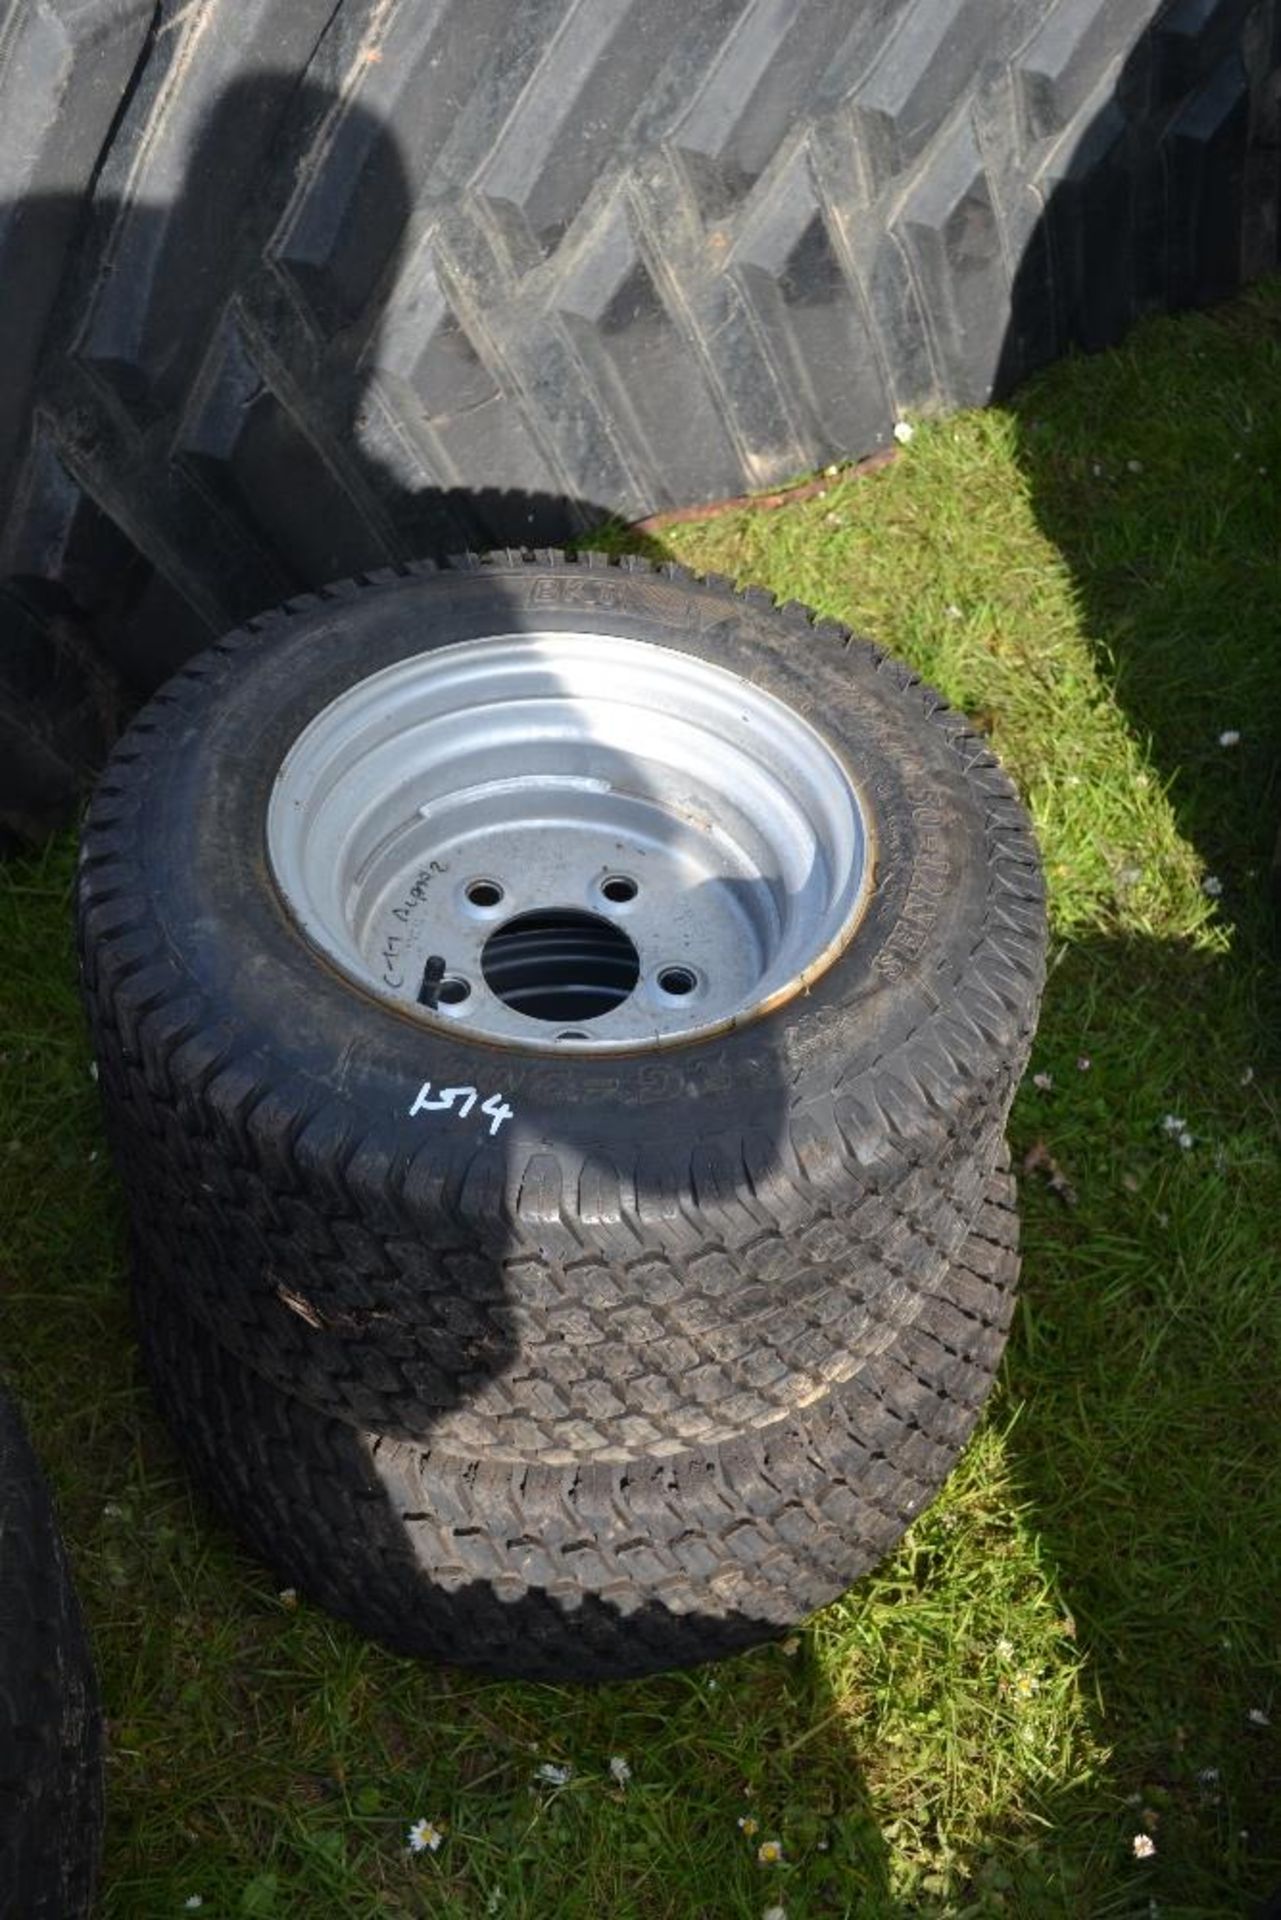 2x BKT 23x10.50-12 5 stud grass wheels and tyres. *